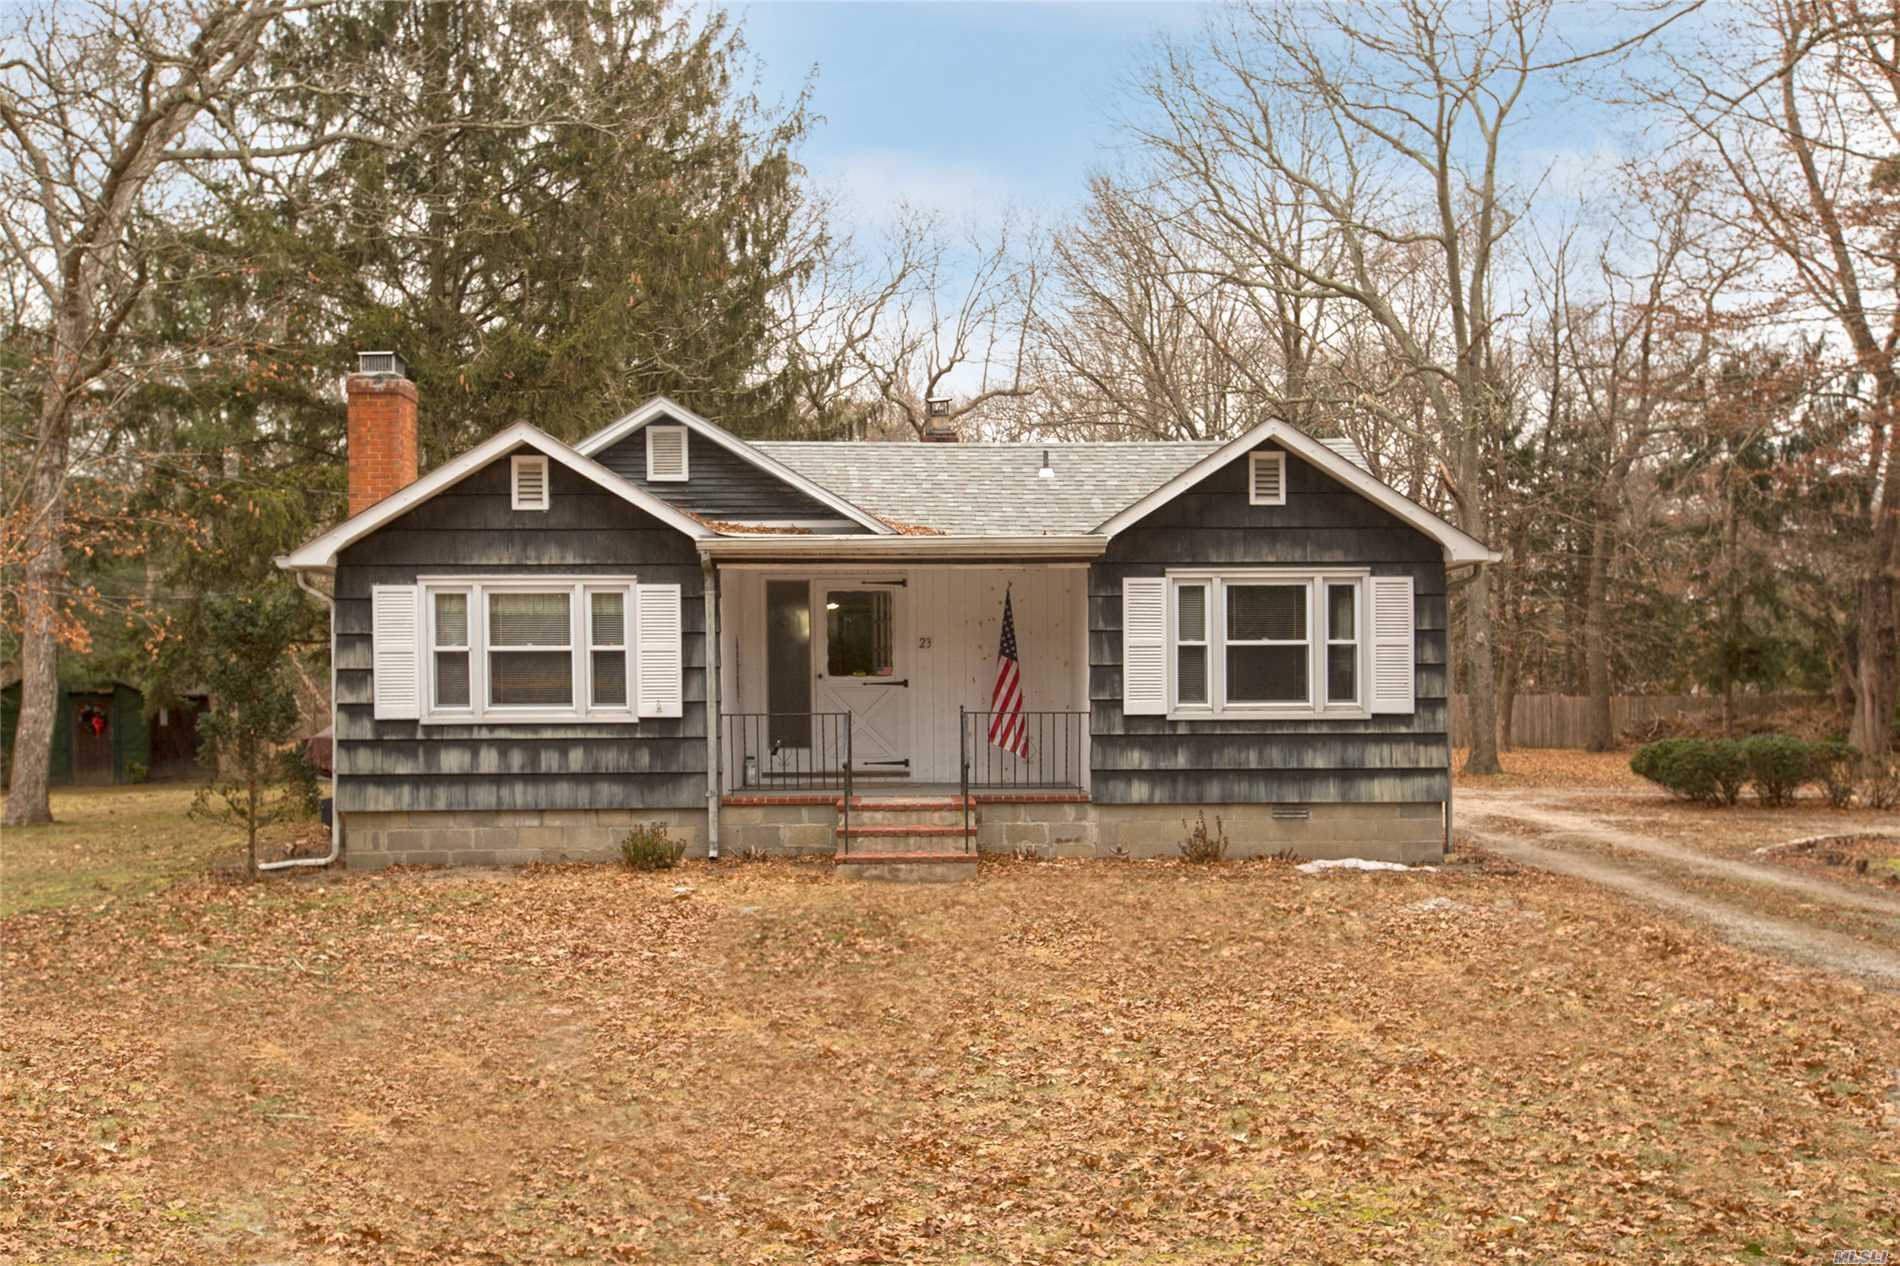 Diamond In The Rough On A Country Lane In Old Medford. So Many Possibilities In This Wonderful Home!! Cozy Living Room W/ Fireplace. Second Story Rooms In Back Of Garage With Bath. If You&rsquo;re Looking For A Private Location, Come See!!!